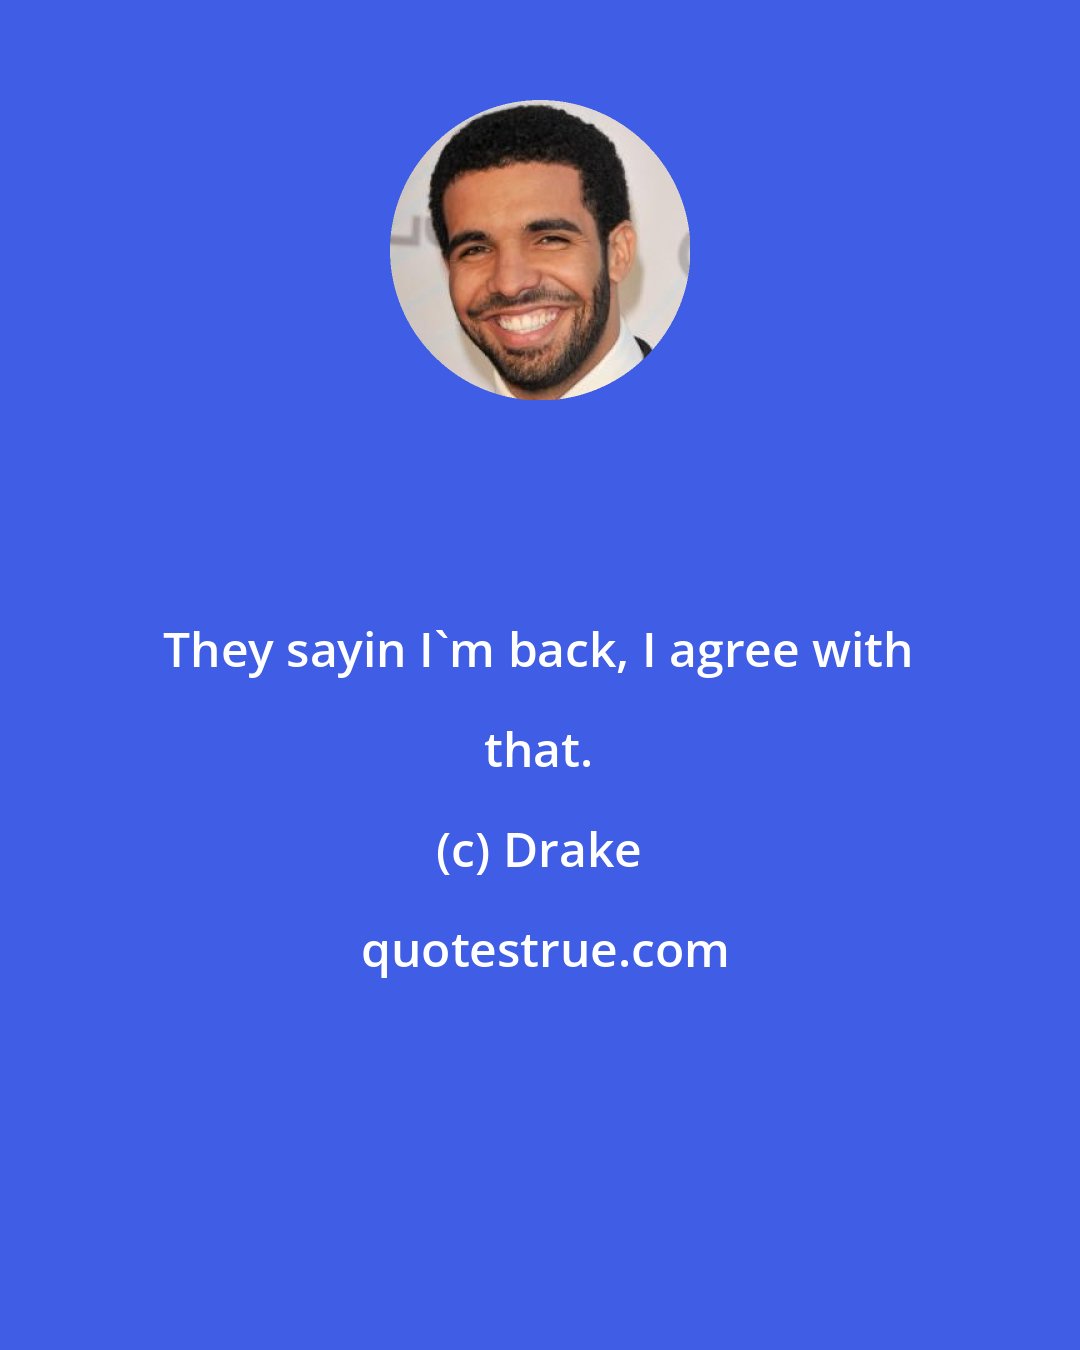 Drake: They sayin I'm back, I agree with that.